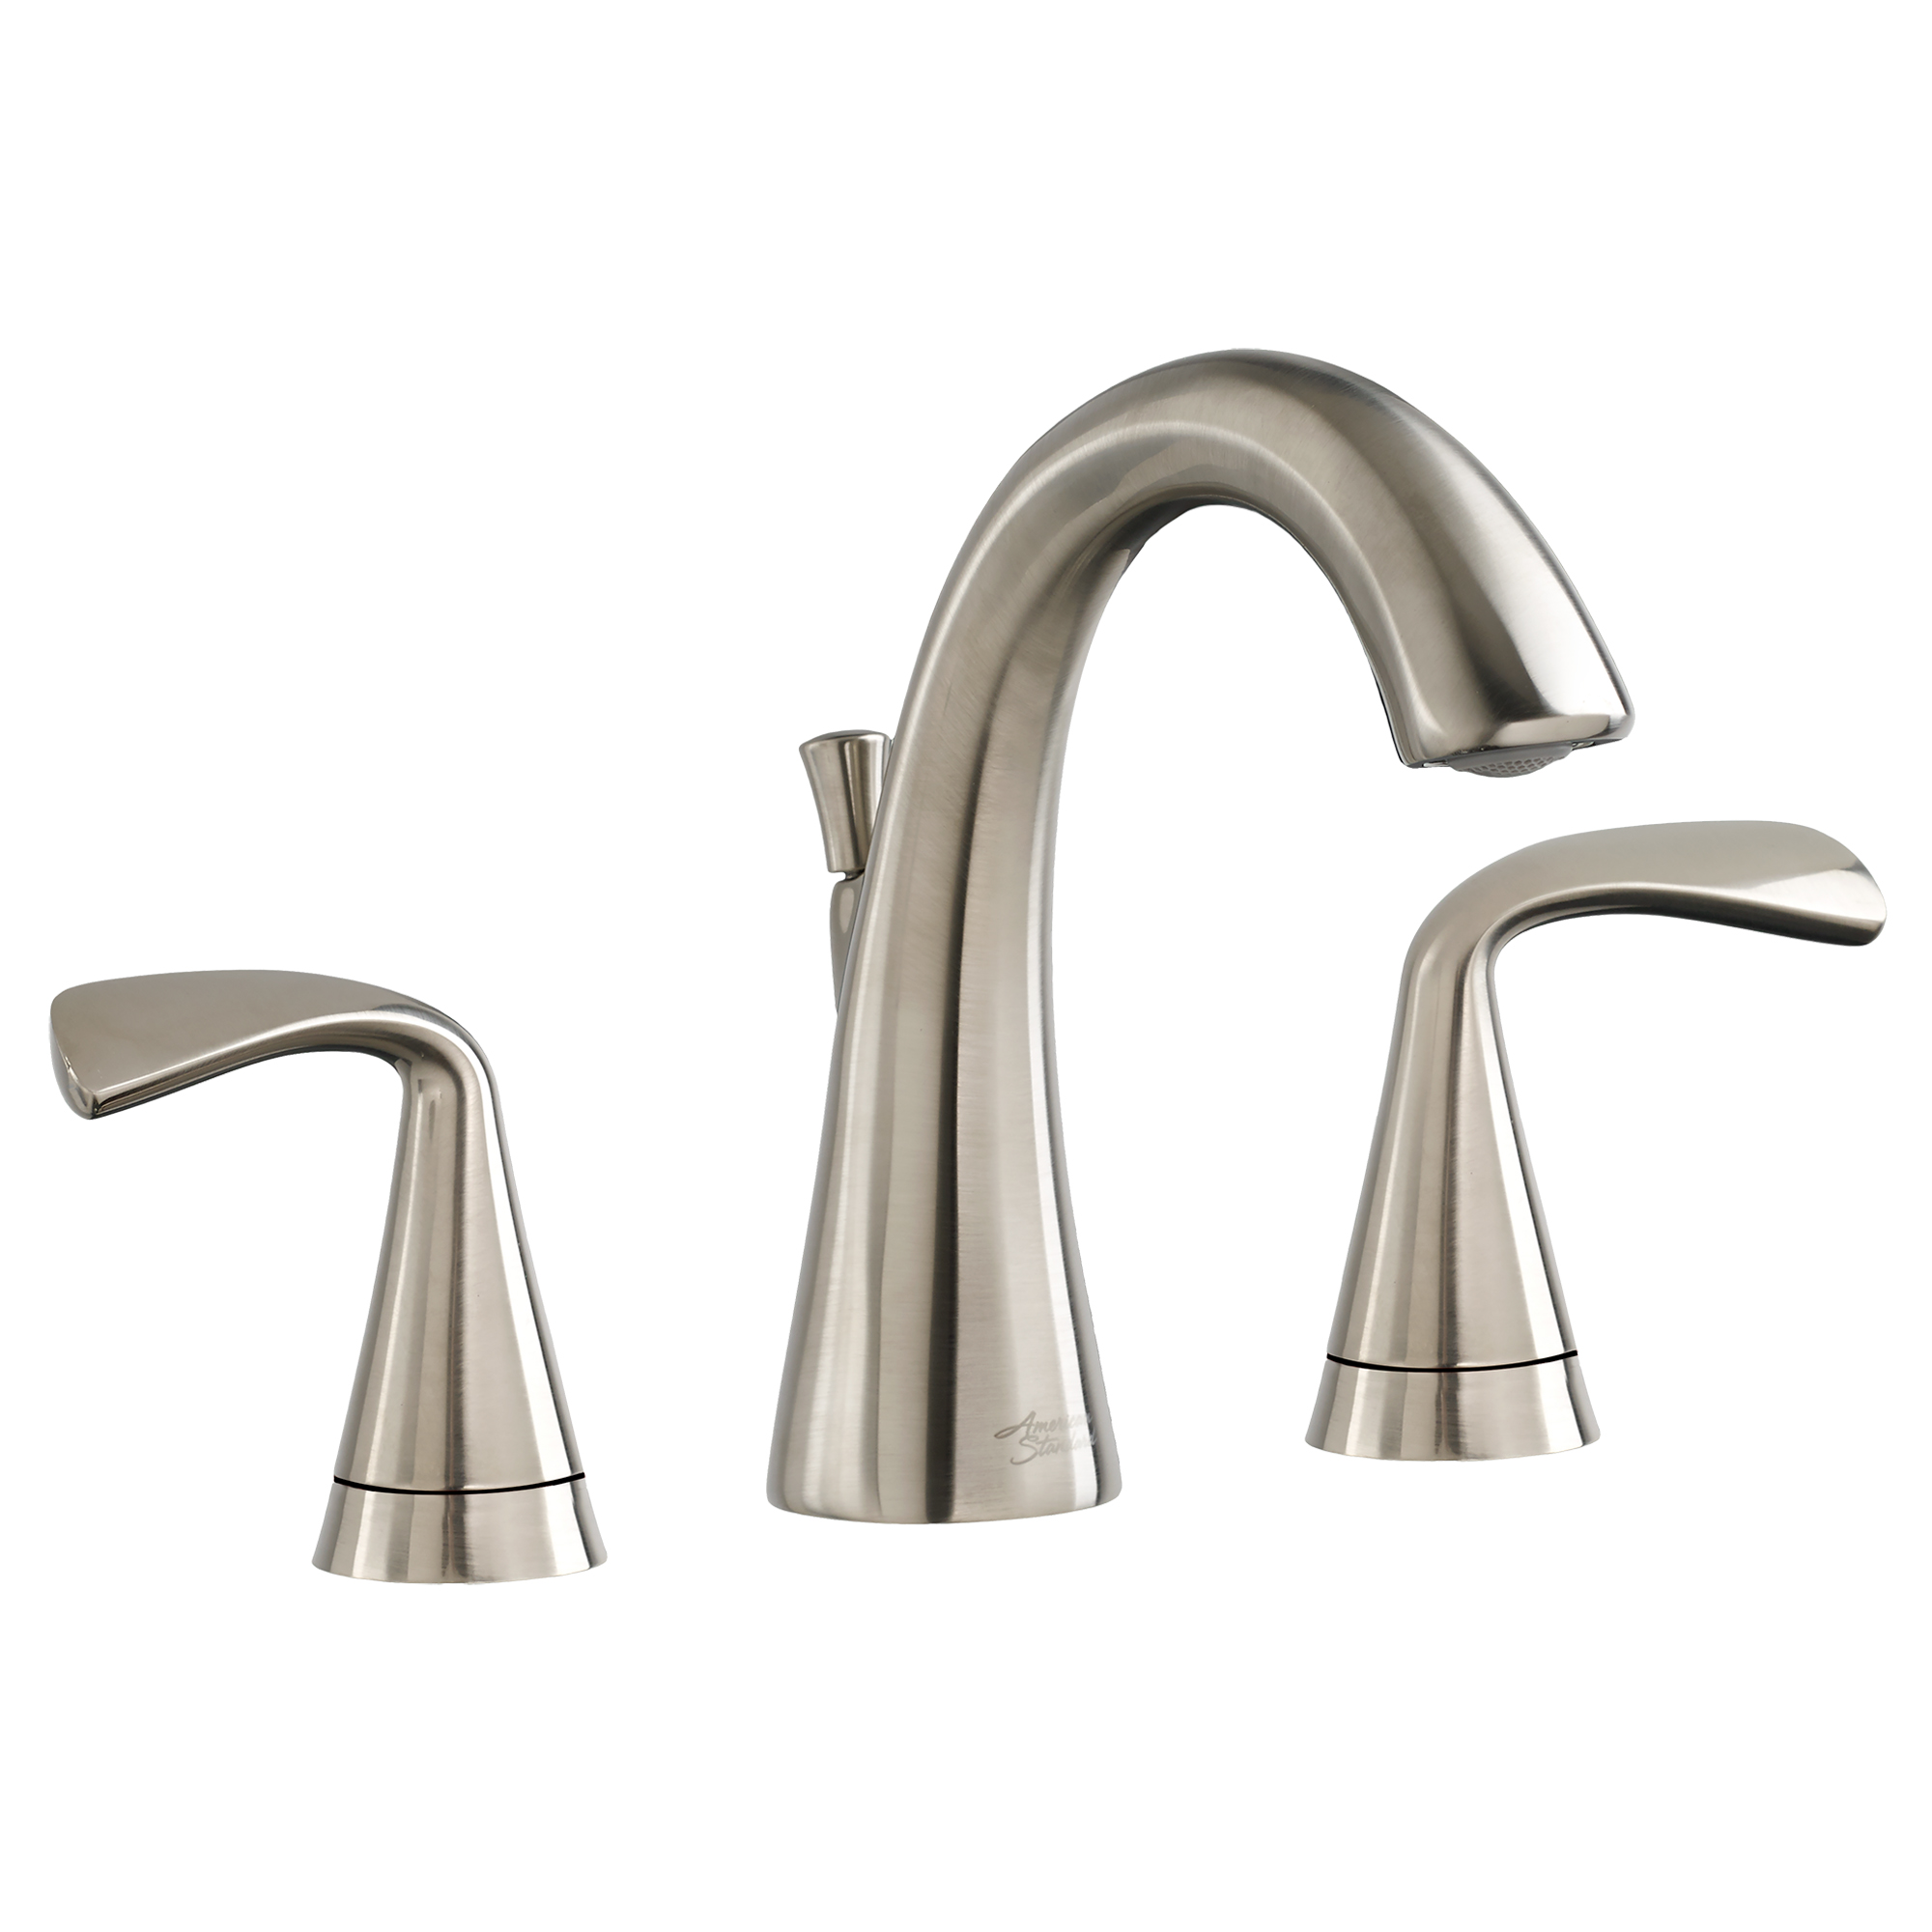 Fluent™ 8-Inch Widespread 2-Handle Bathroom Faucet 1.2 gpm/4.5 L/min With Lever Handles